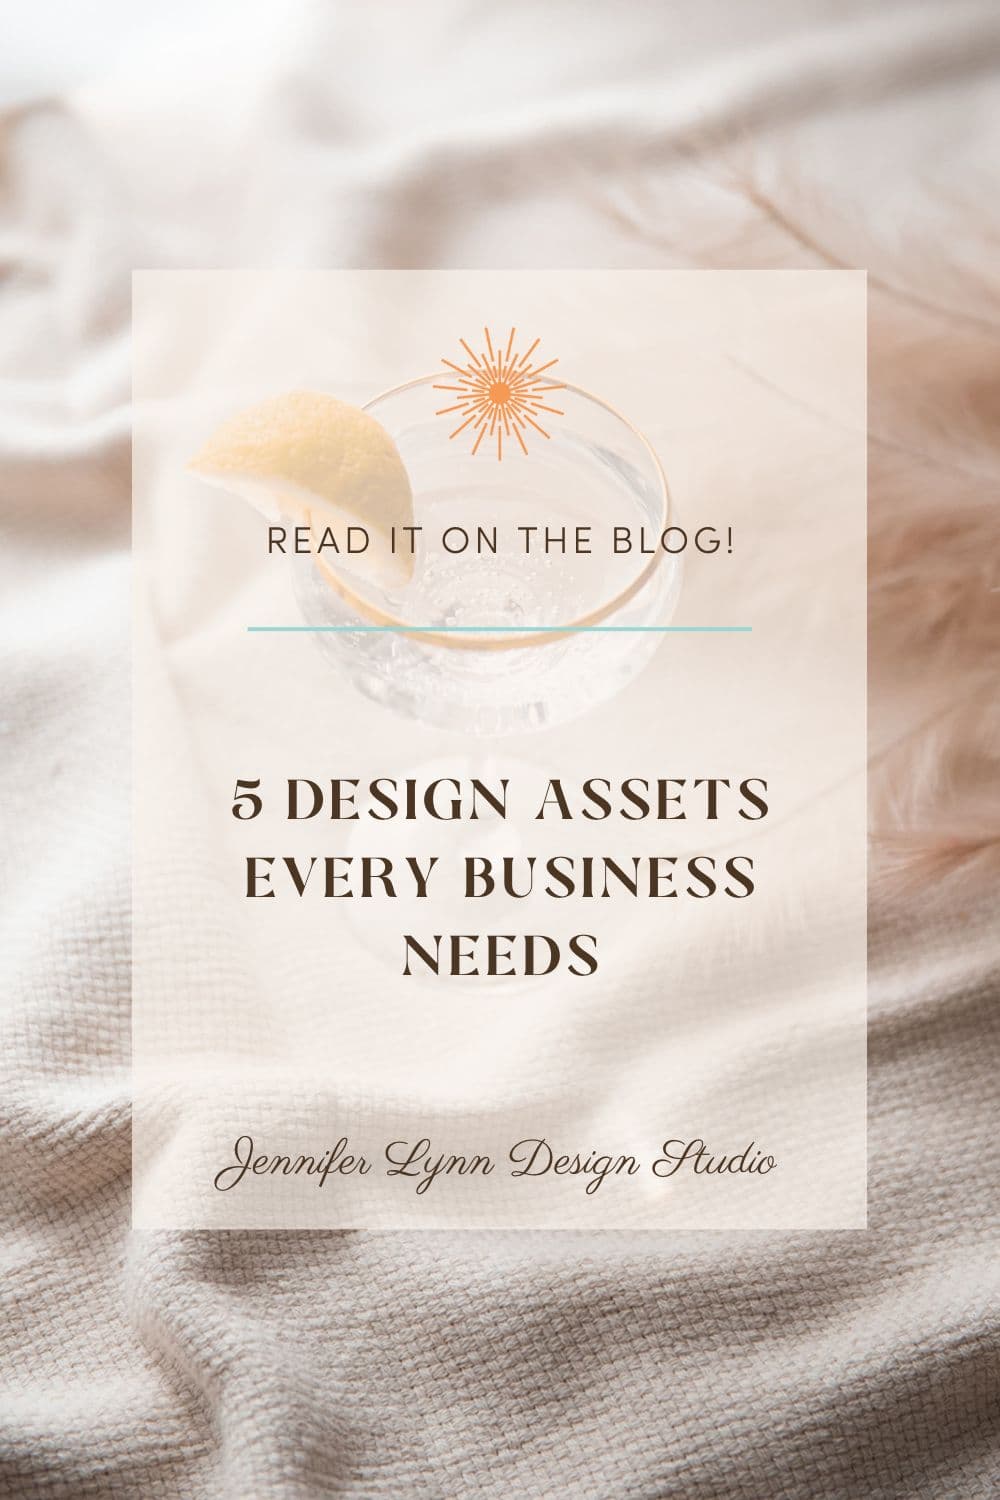 5 Design Assets Every Business Needs to Succeed by Jennifer Lynn Design Studio